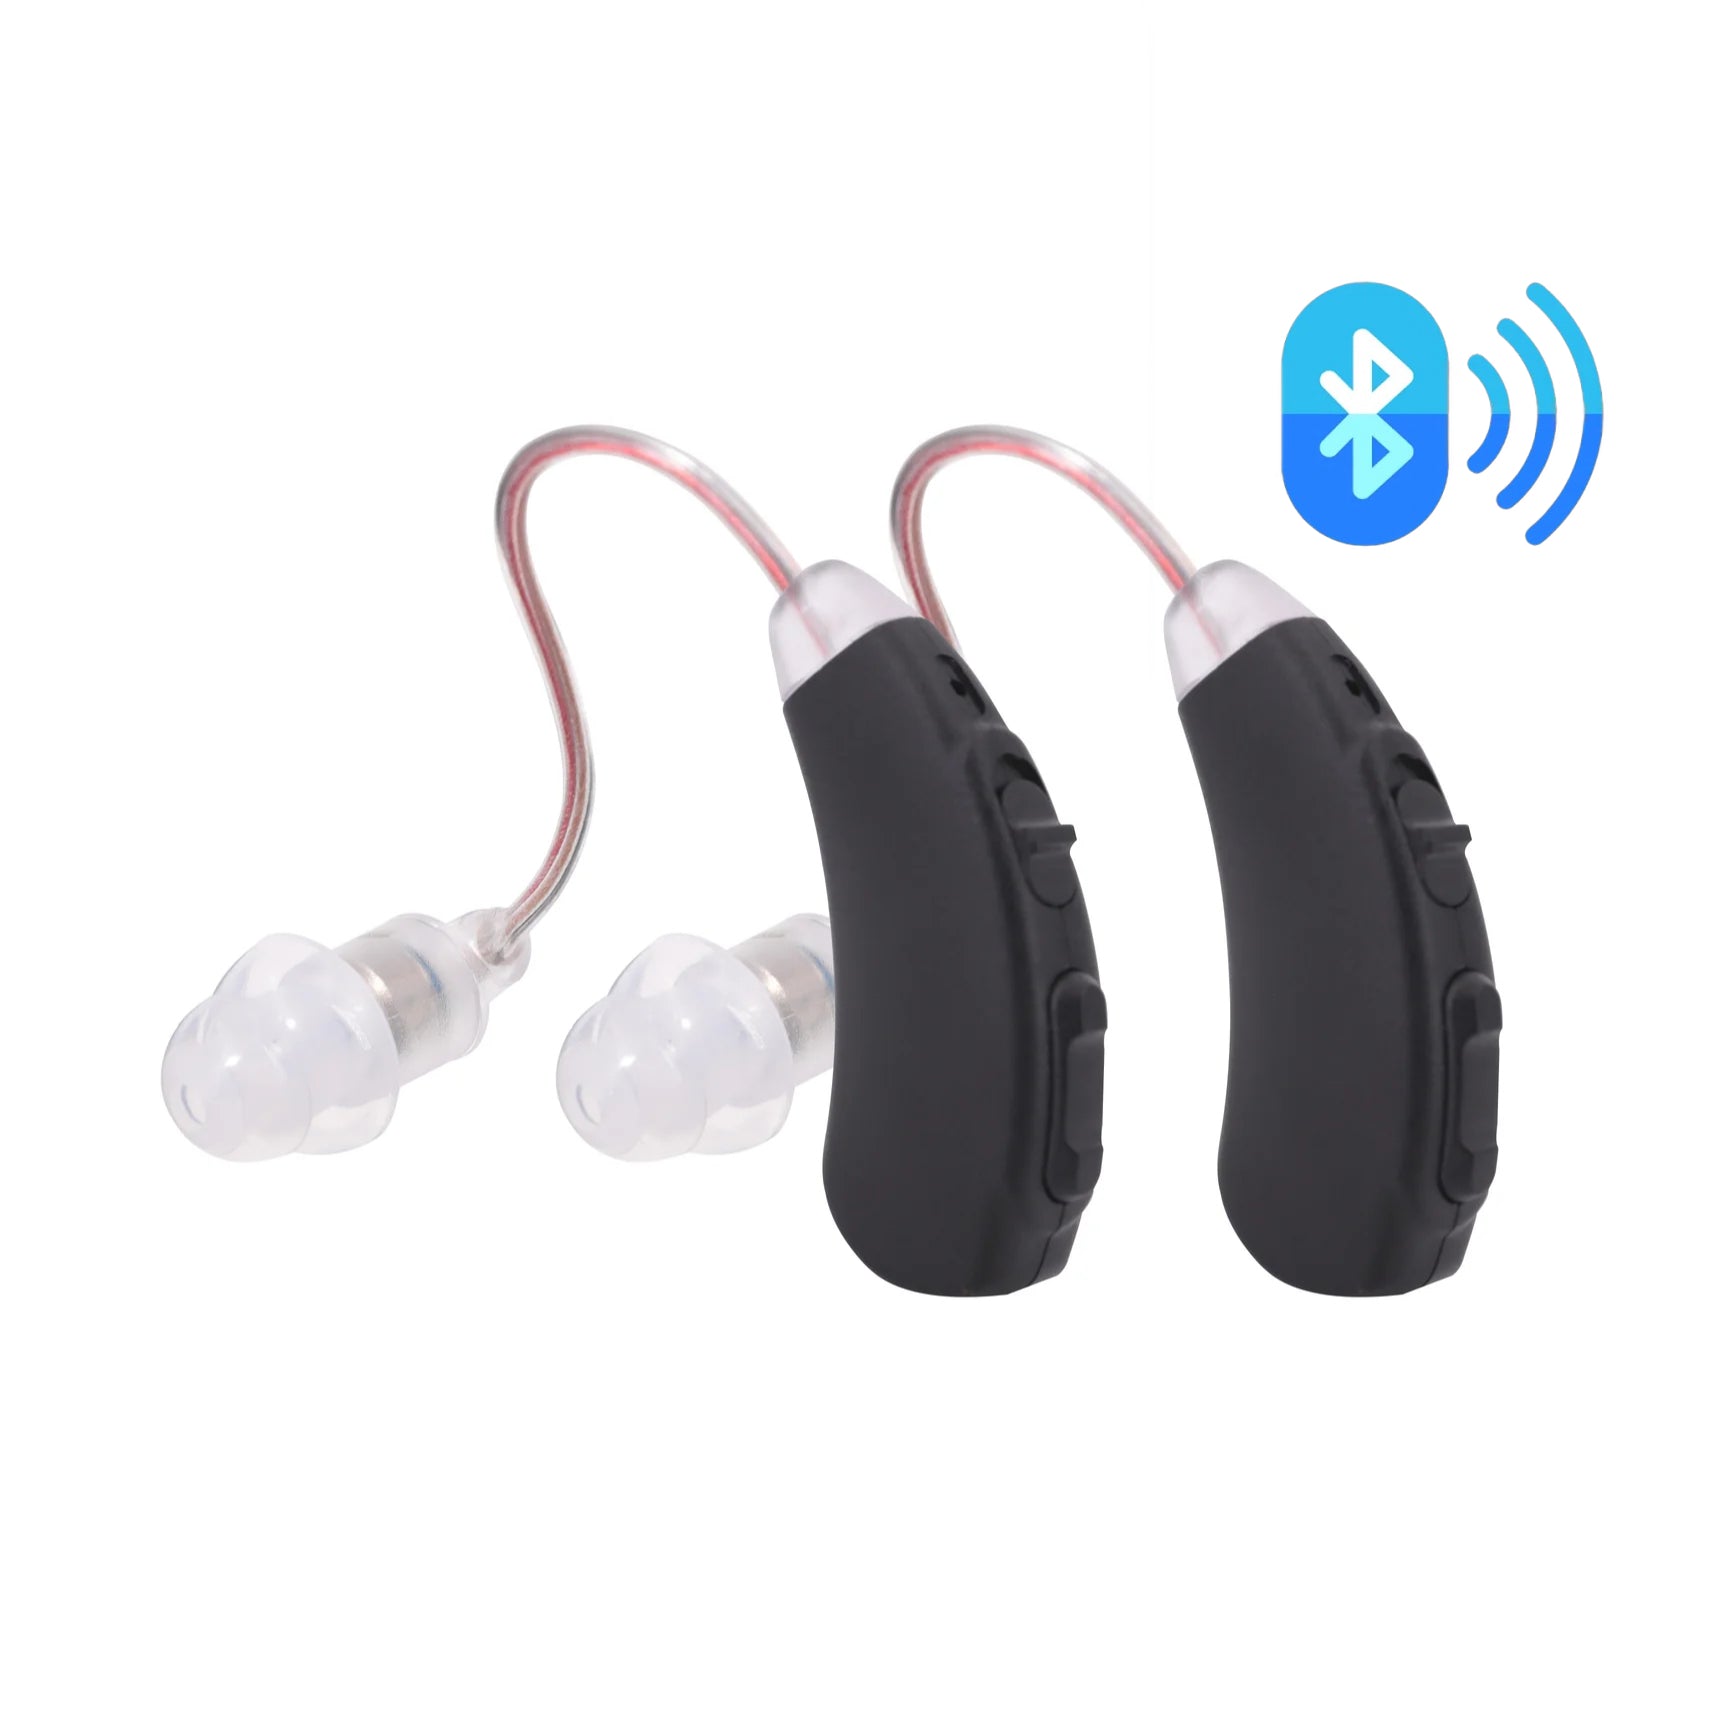 Fisdemo B Bluetooth Hearing Aids for Seniors Adults to Enjoy Hand-free Phone Calls with More Than 30 Hours Longtime Use